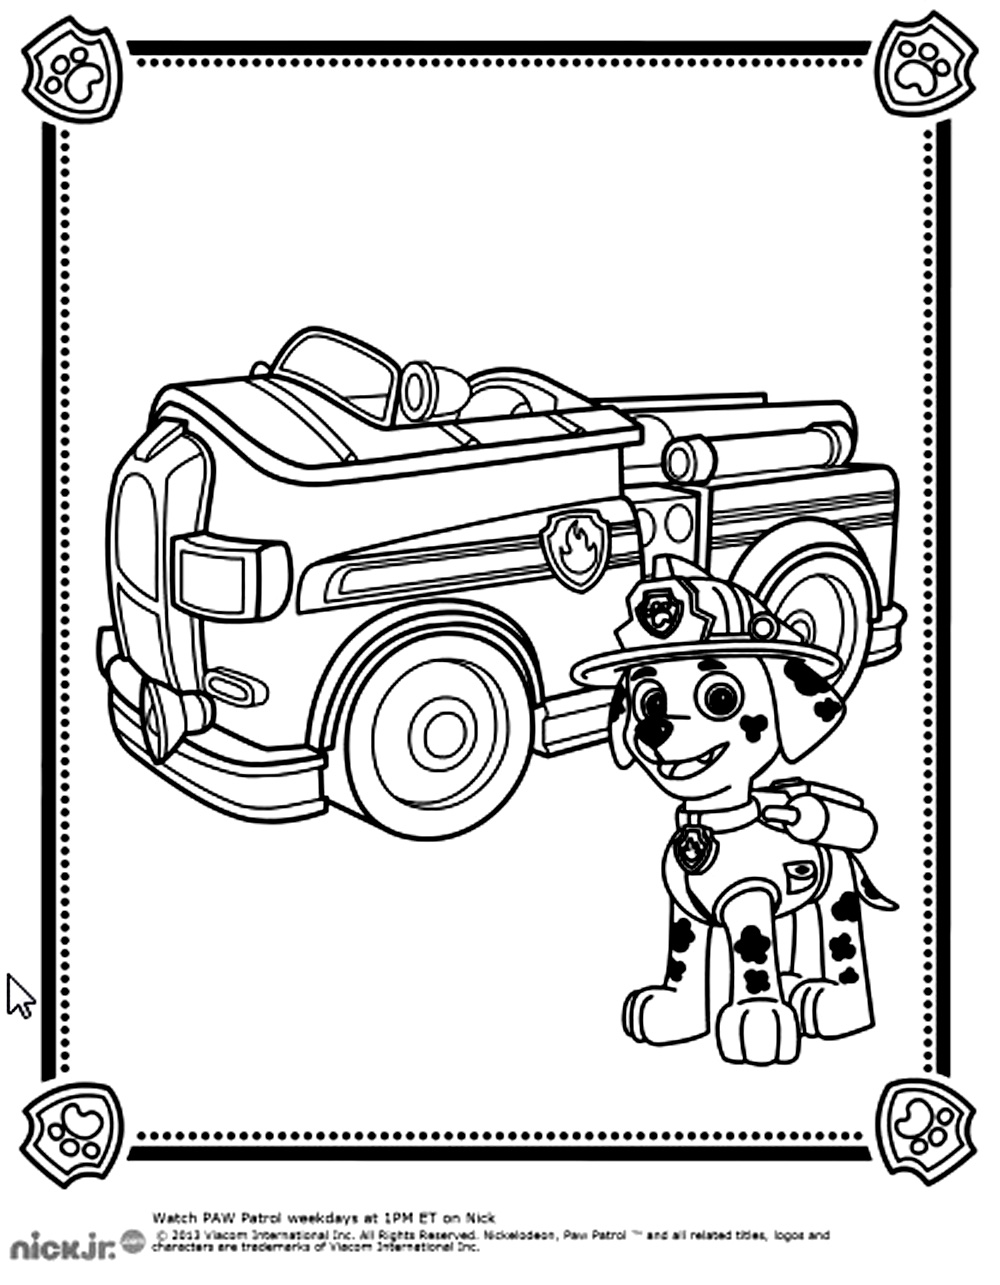 The fire dog in front of his truck!